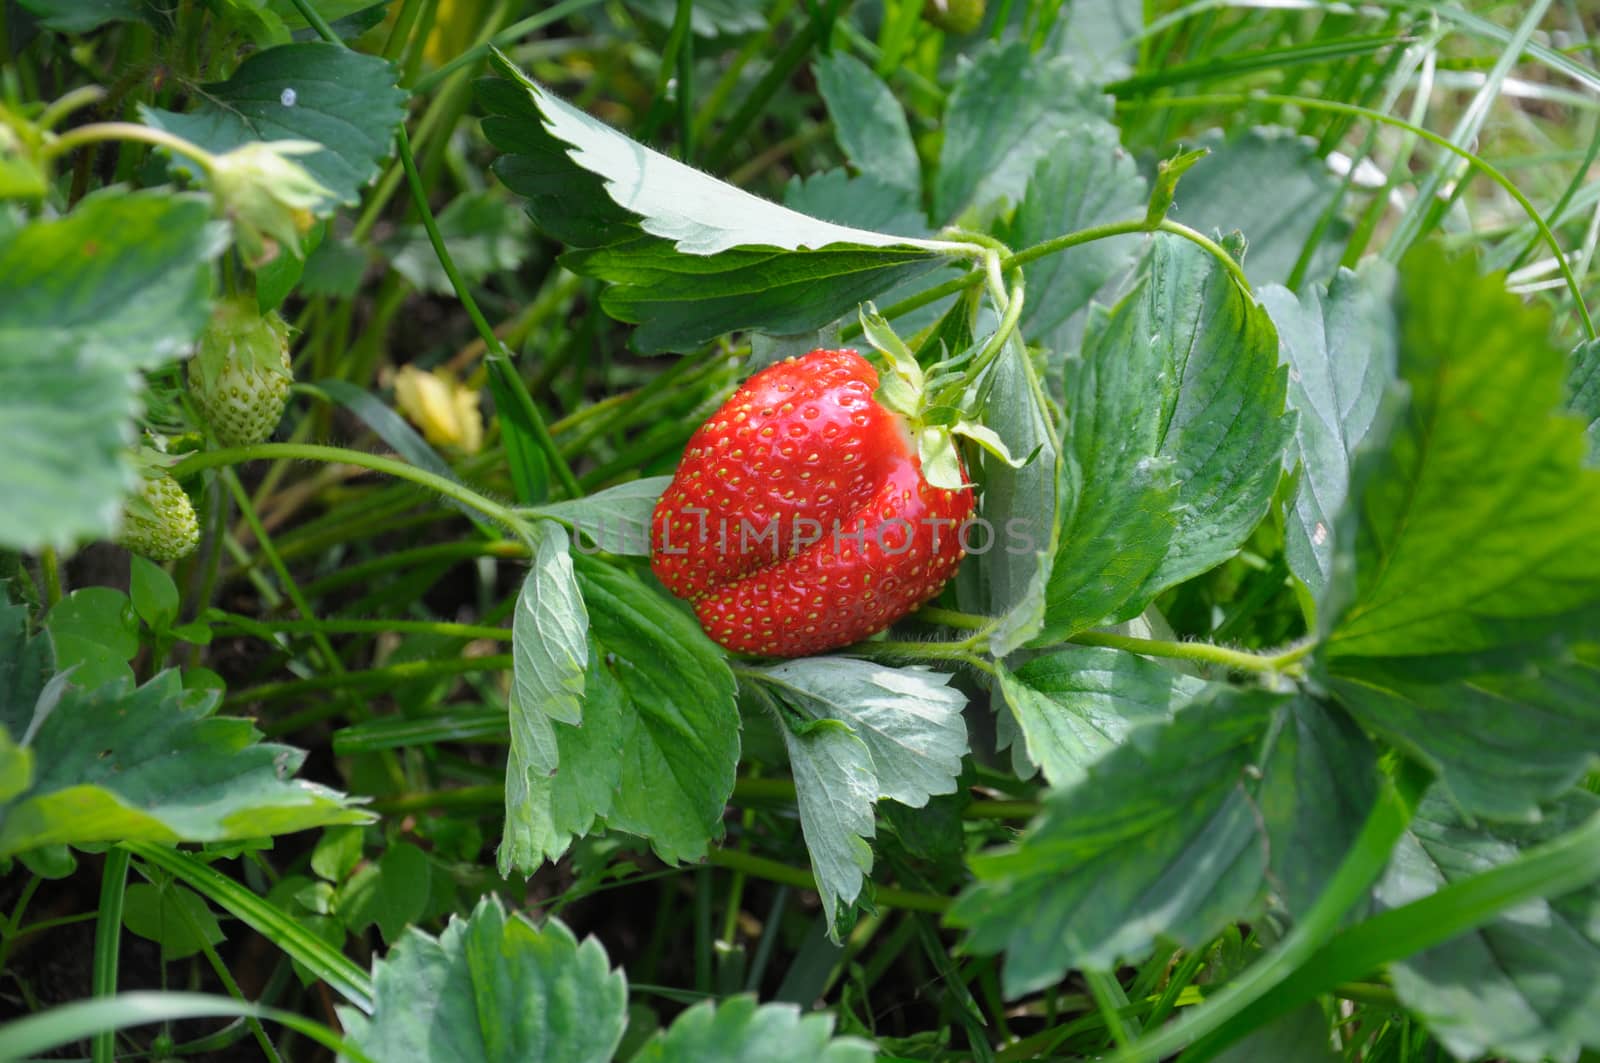 Close-up view of the strawberry and strawberry bush in a natural scene